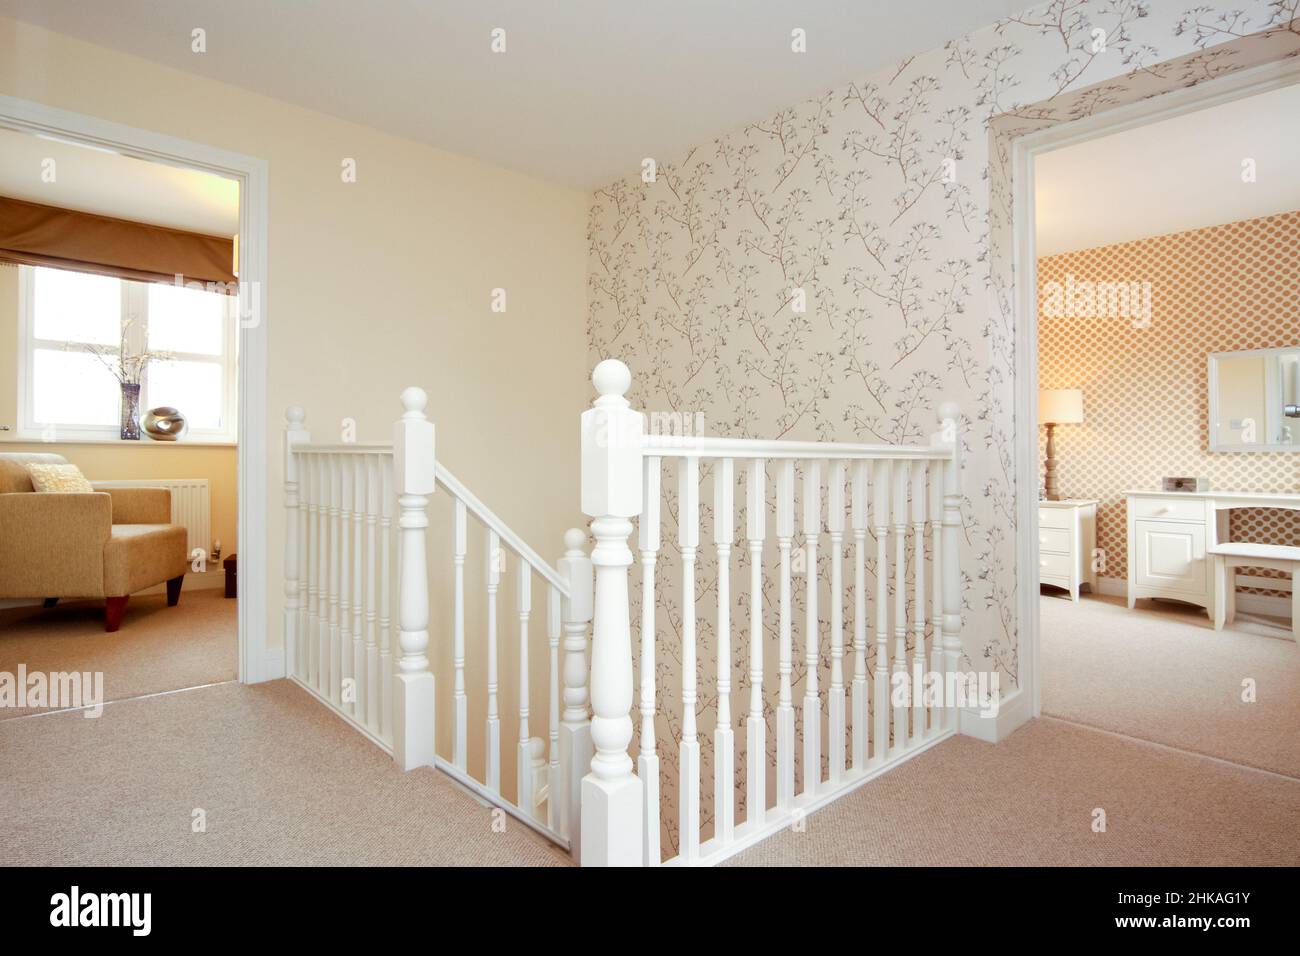 Landing in a modern house, view across stairs and bannister into two bedrooms, feature wall. Stock Photo